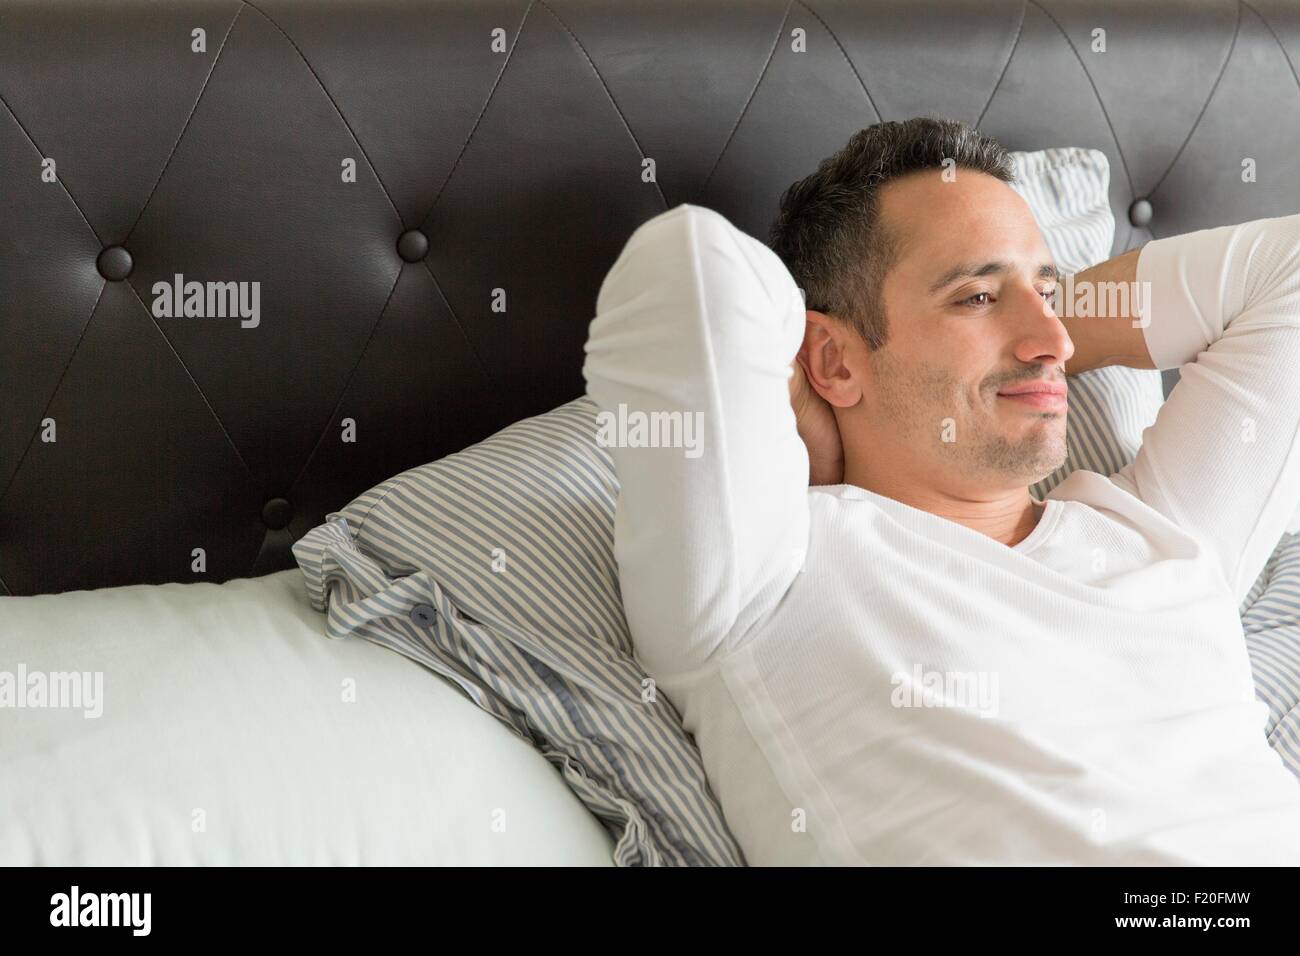 Getting Out Of Bed High Resolution Stock Photography And Images Alamy